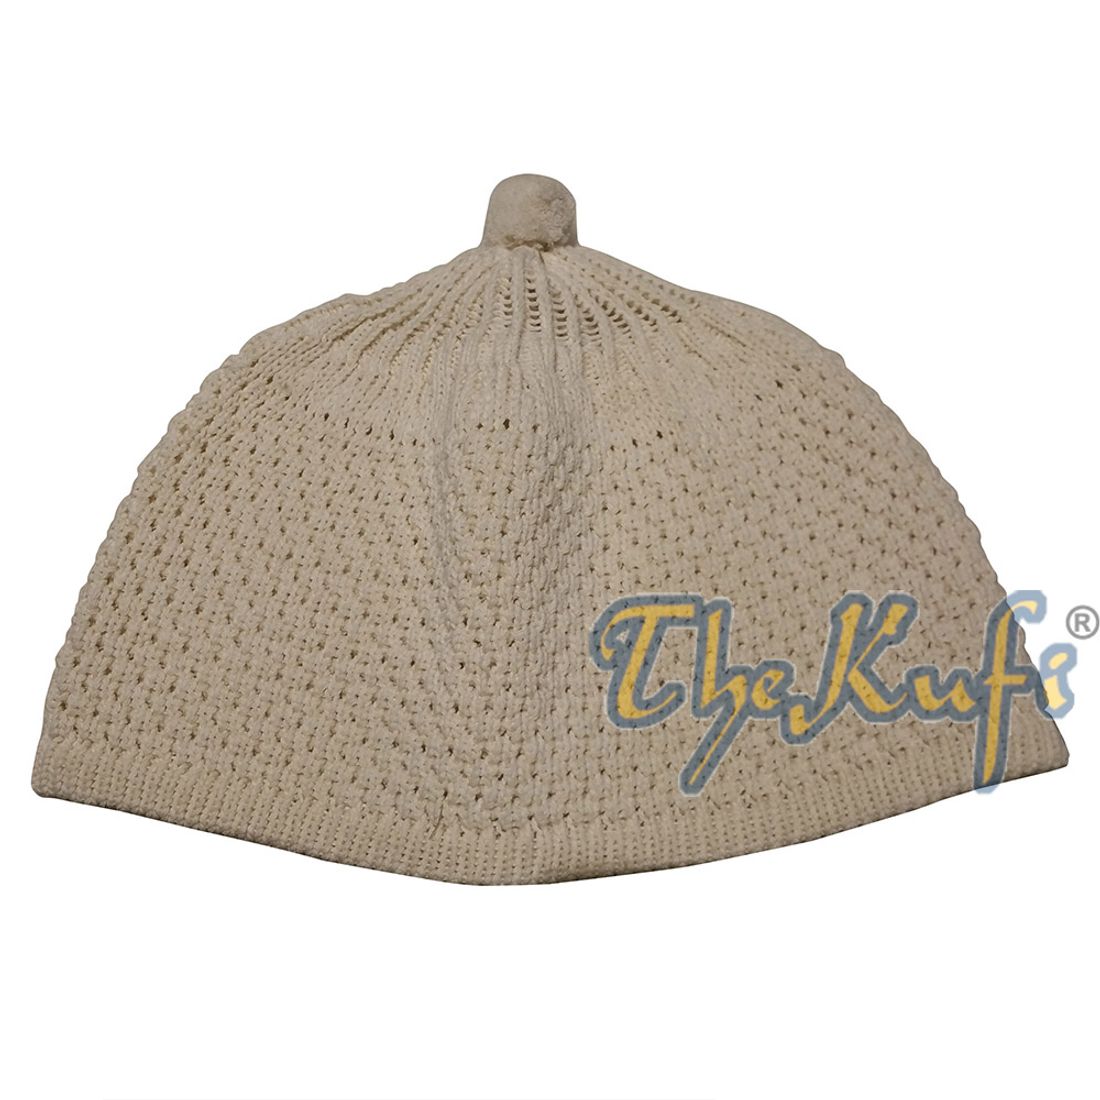 Cream Color Turkish-style Knit Stretchy Beanie Hat One-size